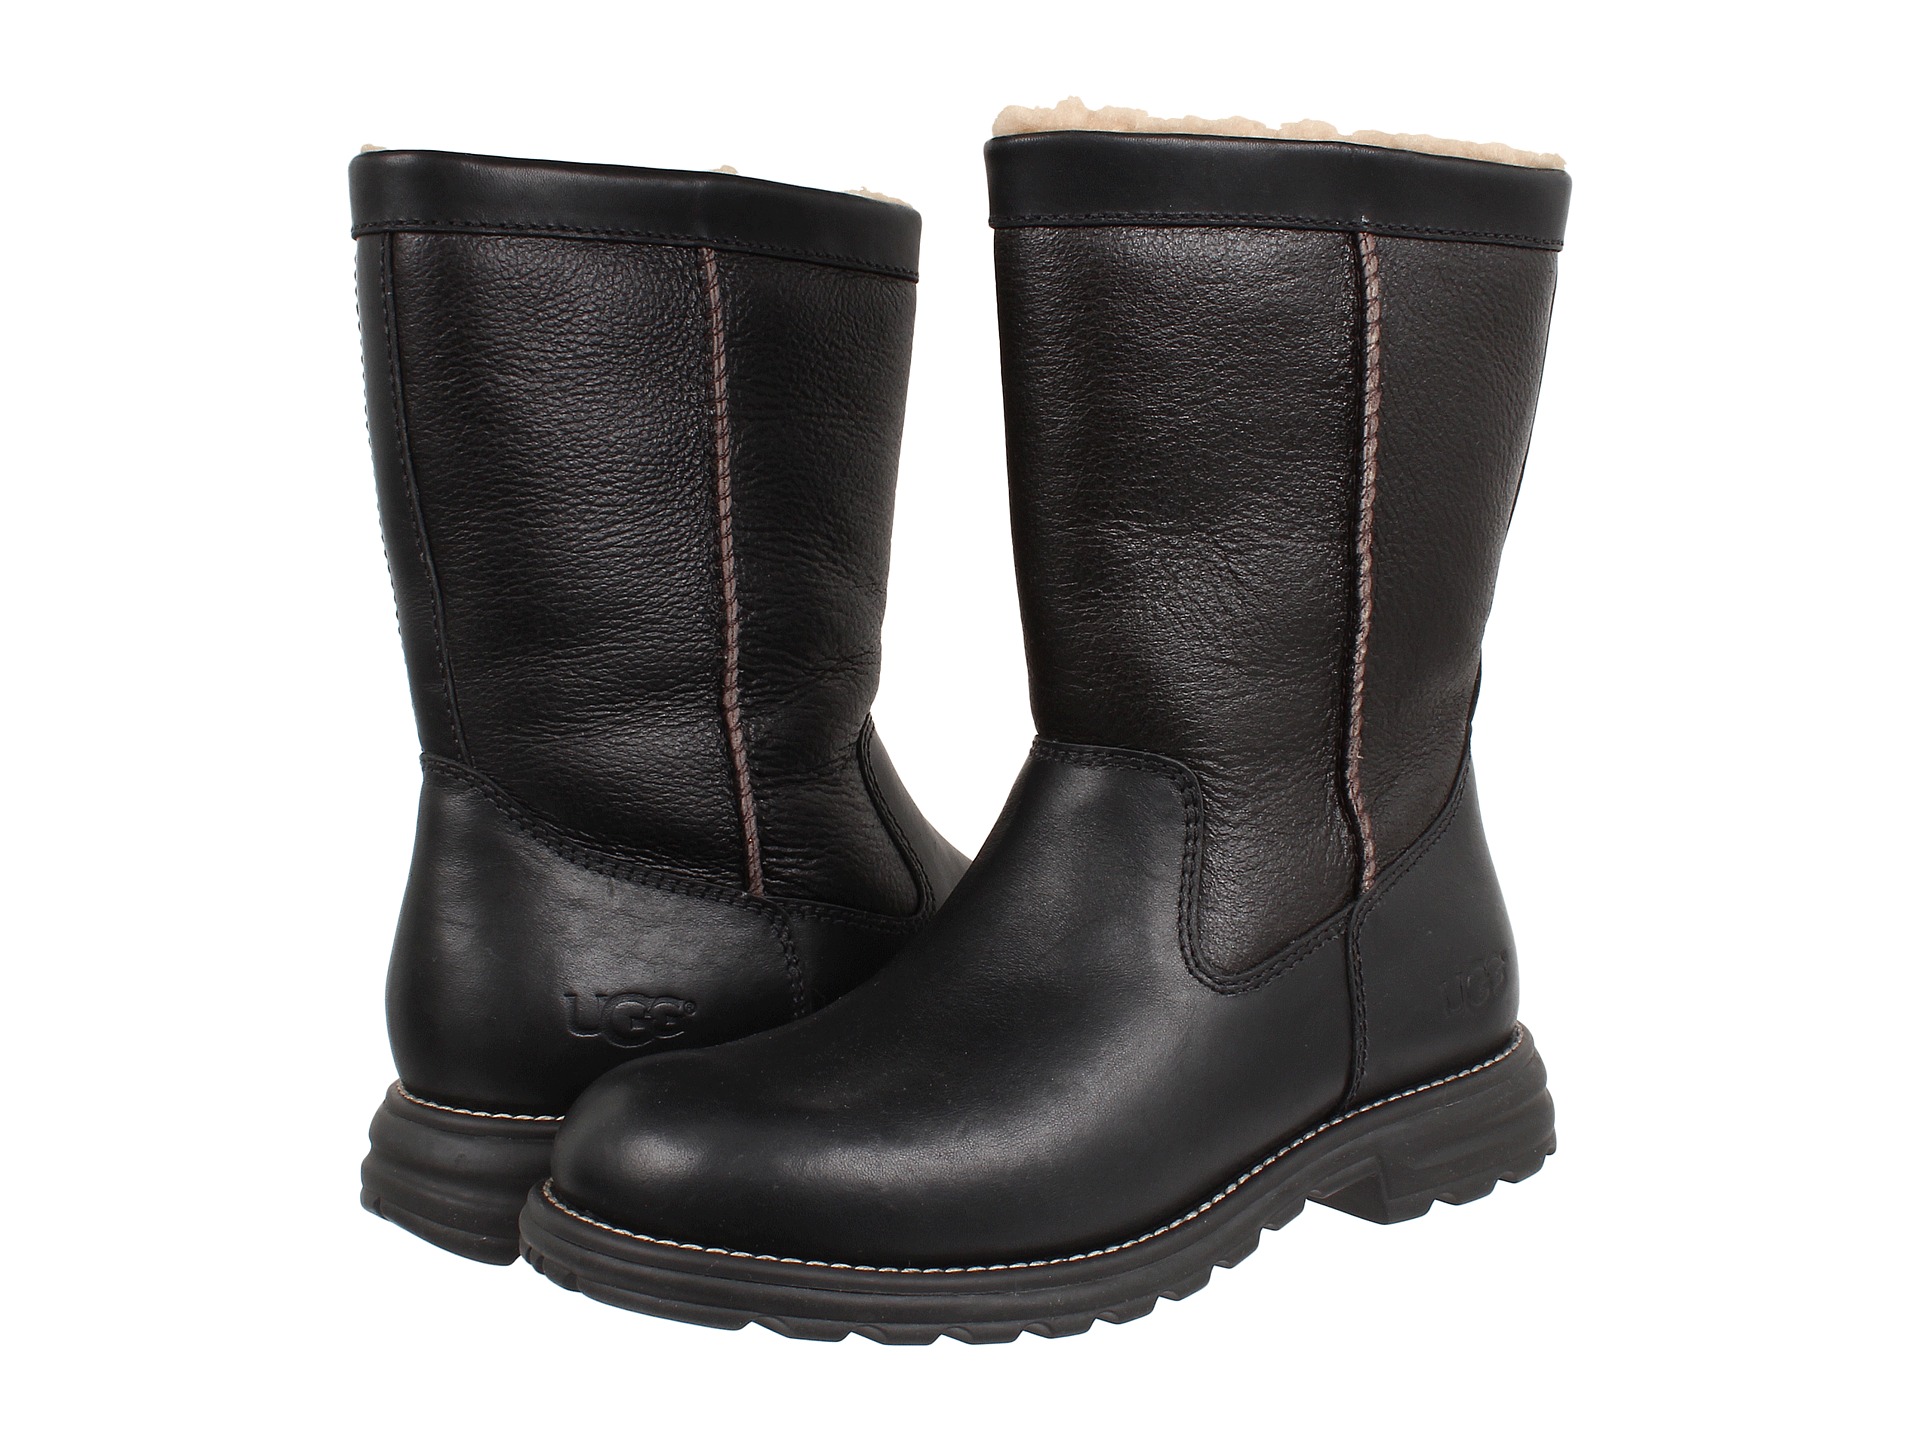 Discontinued Ugg Boots Clearance Sale